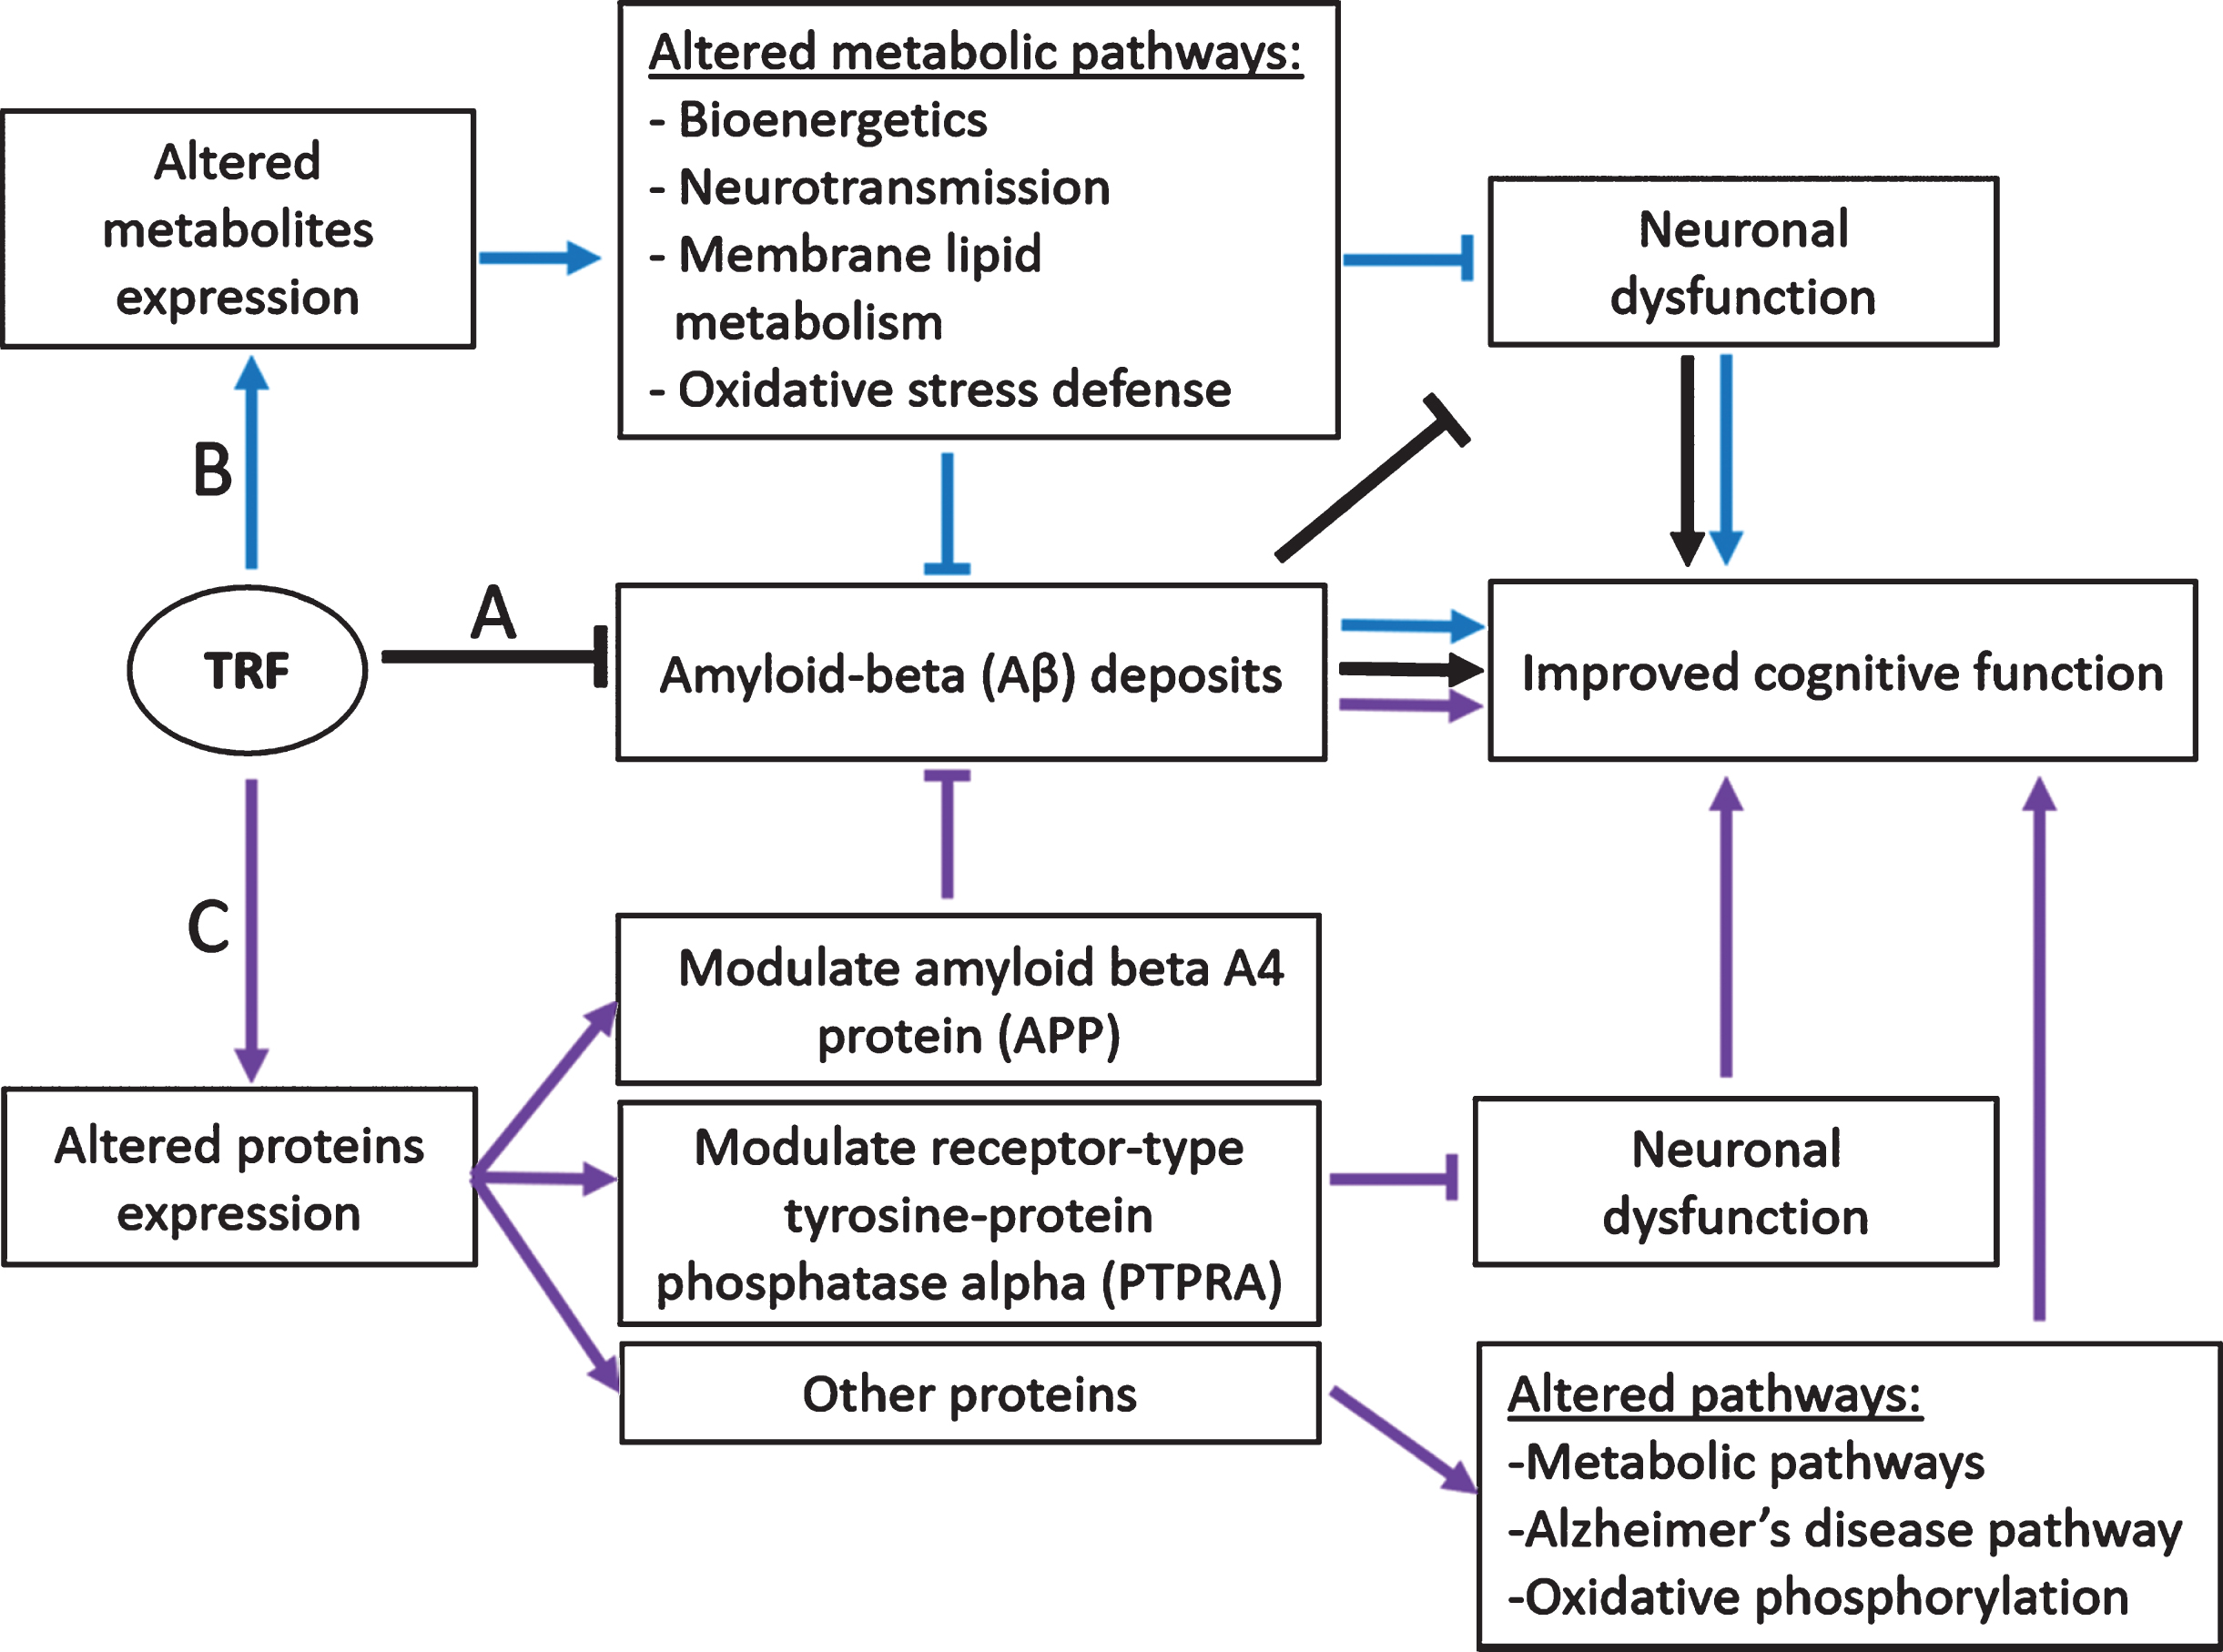 Proposed mechanisms of TRF action in improving cognitive function in AβPP/PS1 mice. Aβ deposits, altered metabolites, and proteins expression cause neuronal dysfunction leading to cognitive impairment. A) TRF reduces Aβ deposition and improves cognitive function (black arrow) [17]. B) TRF modulates metabolic pathways, reducing neuronal dysfunction, and improves cognitive function (blue arrow) [18]. C) TRF modulates amyloid beta A4 protein (APP) leading to reduced Aβ deposits and improved cognitive function. TRF also modulates receptor-type tyrosine-protein phosphatase alpha (PTPRA), reducing neuronal dysfunction, and improves memory. TRF may also improve memory by modulating other proteins involved in metabolic pathways, Alzheimer’s disease pathway, and oxidative phosphorylation (purple arrow). Figure modified from Durani et al. [18].